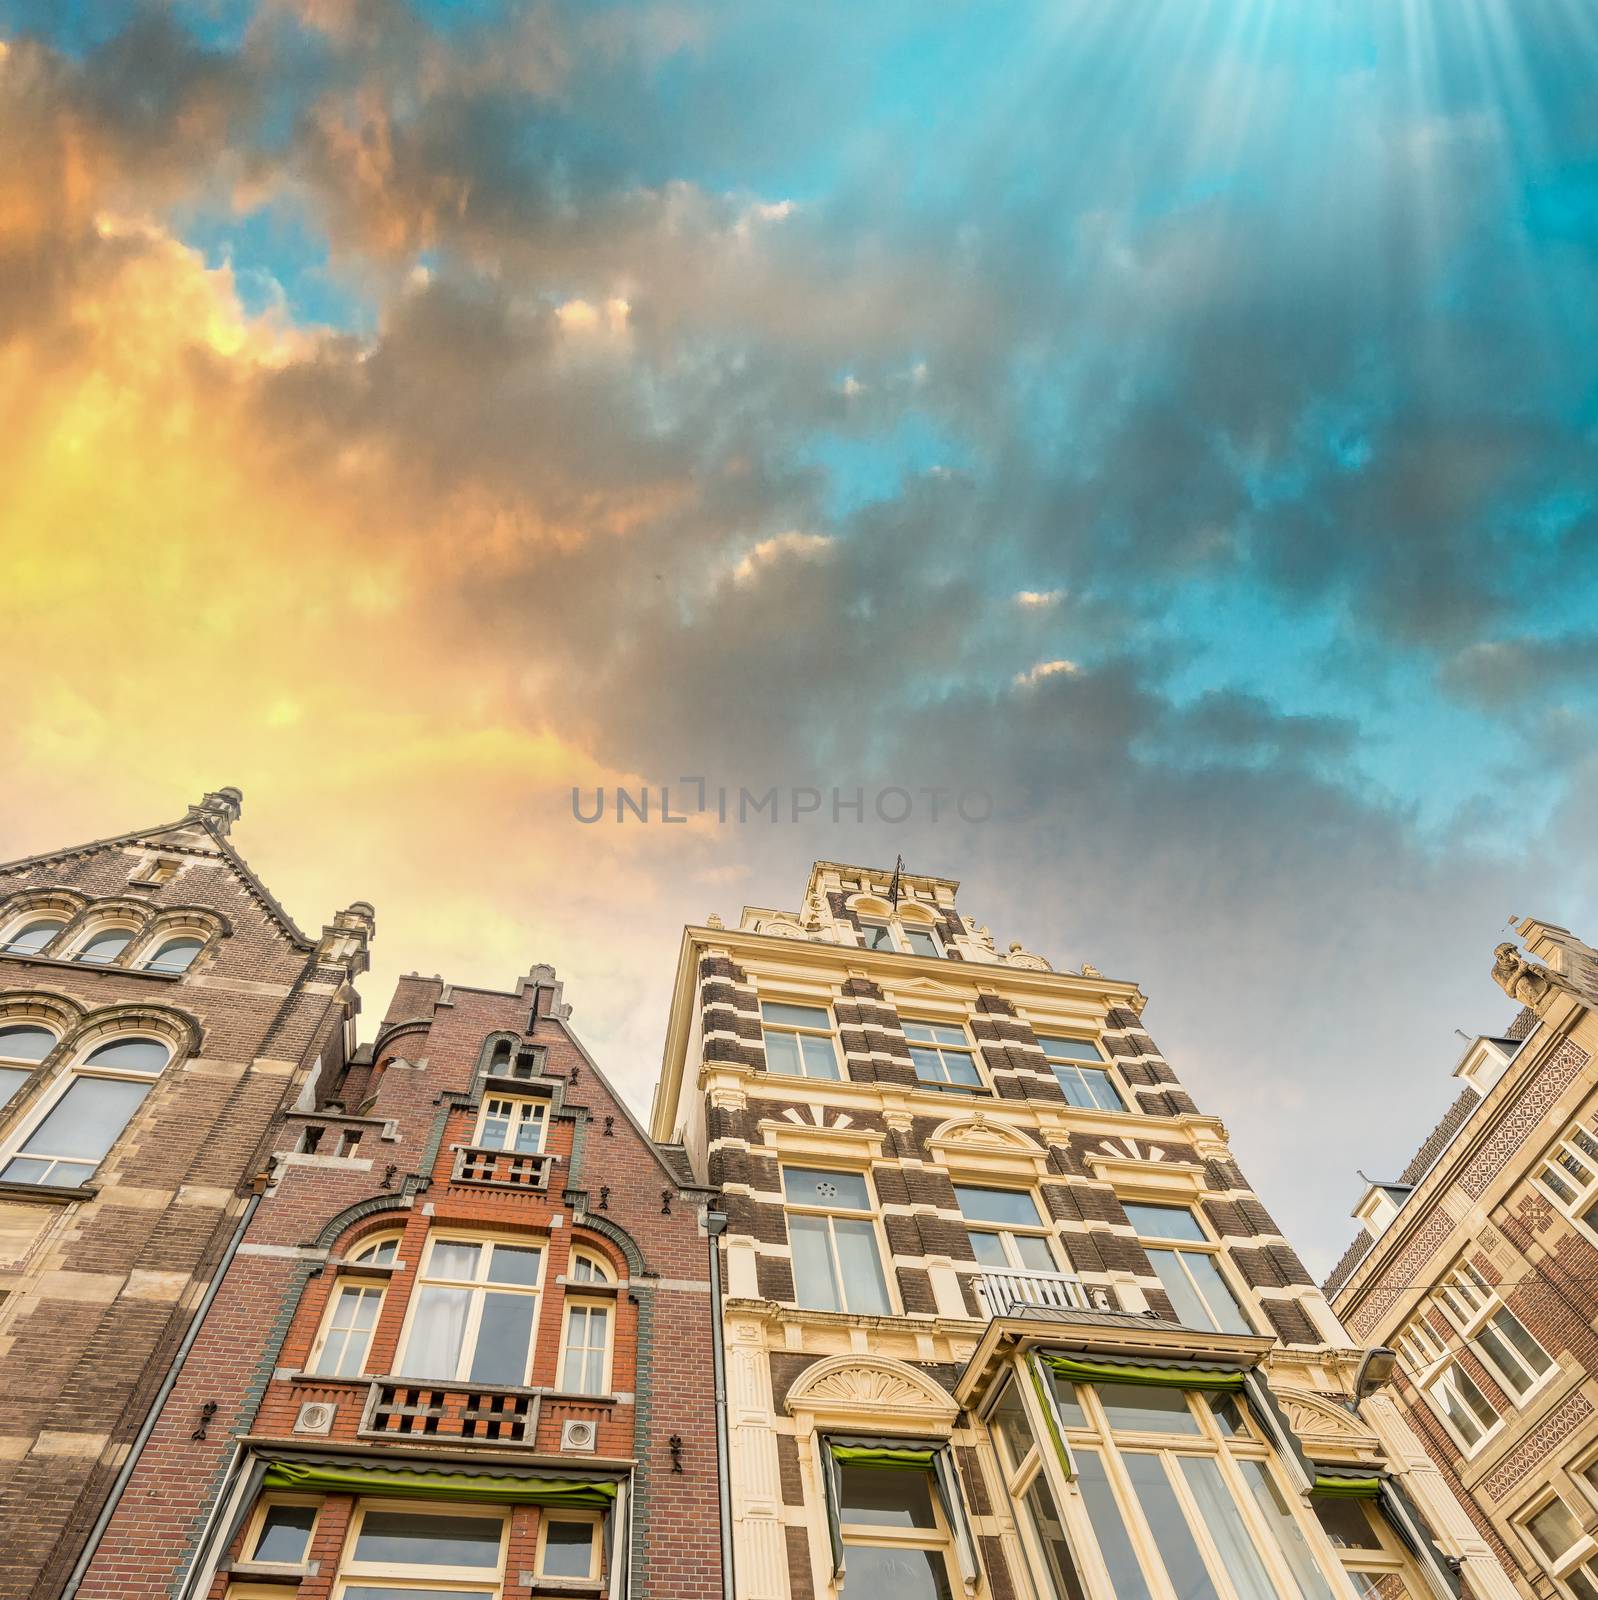 Dramatic sky over Amsterdam buildings by jovannig